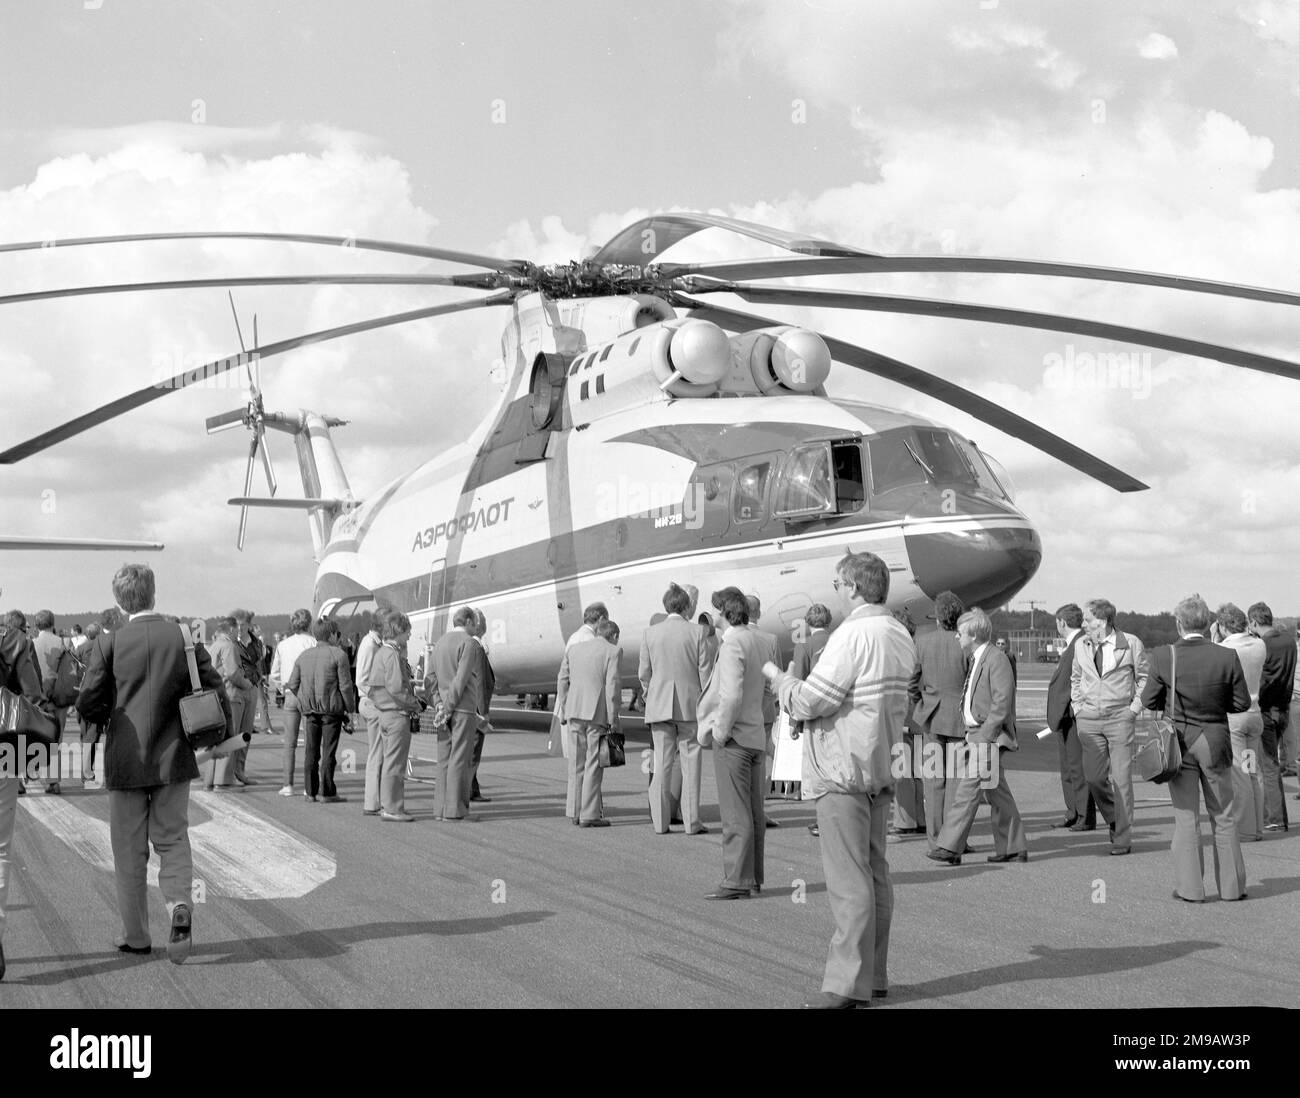 Mil Mi-26 SSSR-06141, at the 1984 SBAC Farnborough Air Show, held from 2-9 September. (Note : The Soviet Union used Cyrillic letters in their aircraft registrations CCCP in Cyrillic is SSSR in English letters). Stock Photo